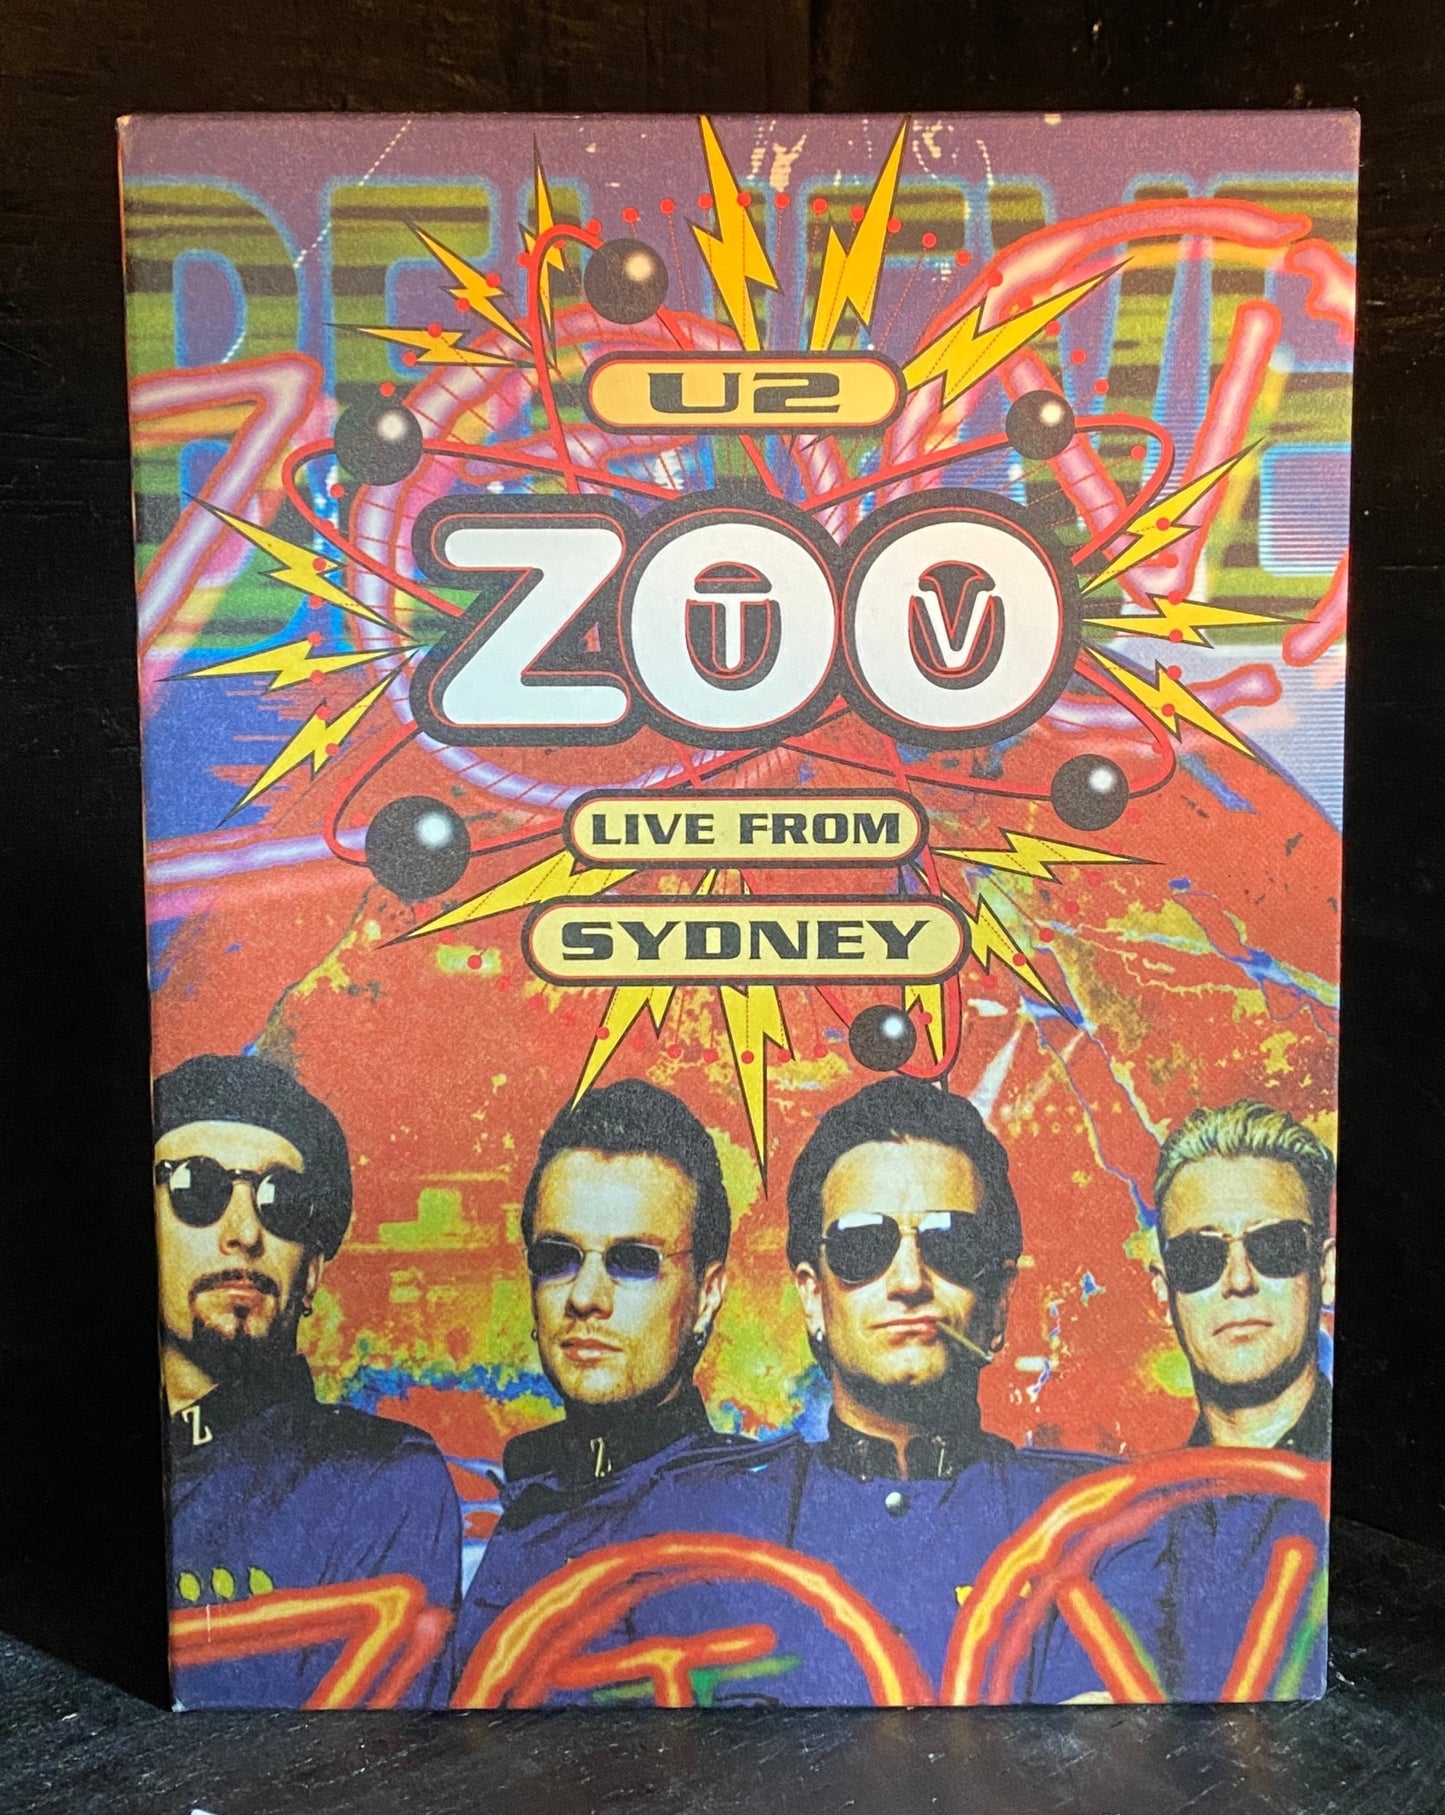 U2 - Zoo TV Live from Sydney (Limited Edition)